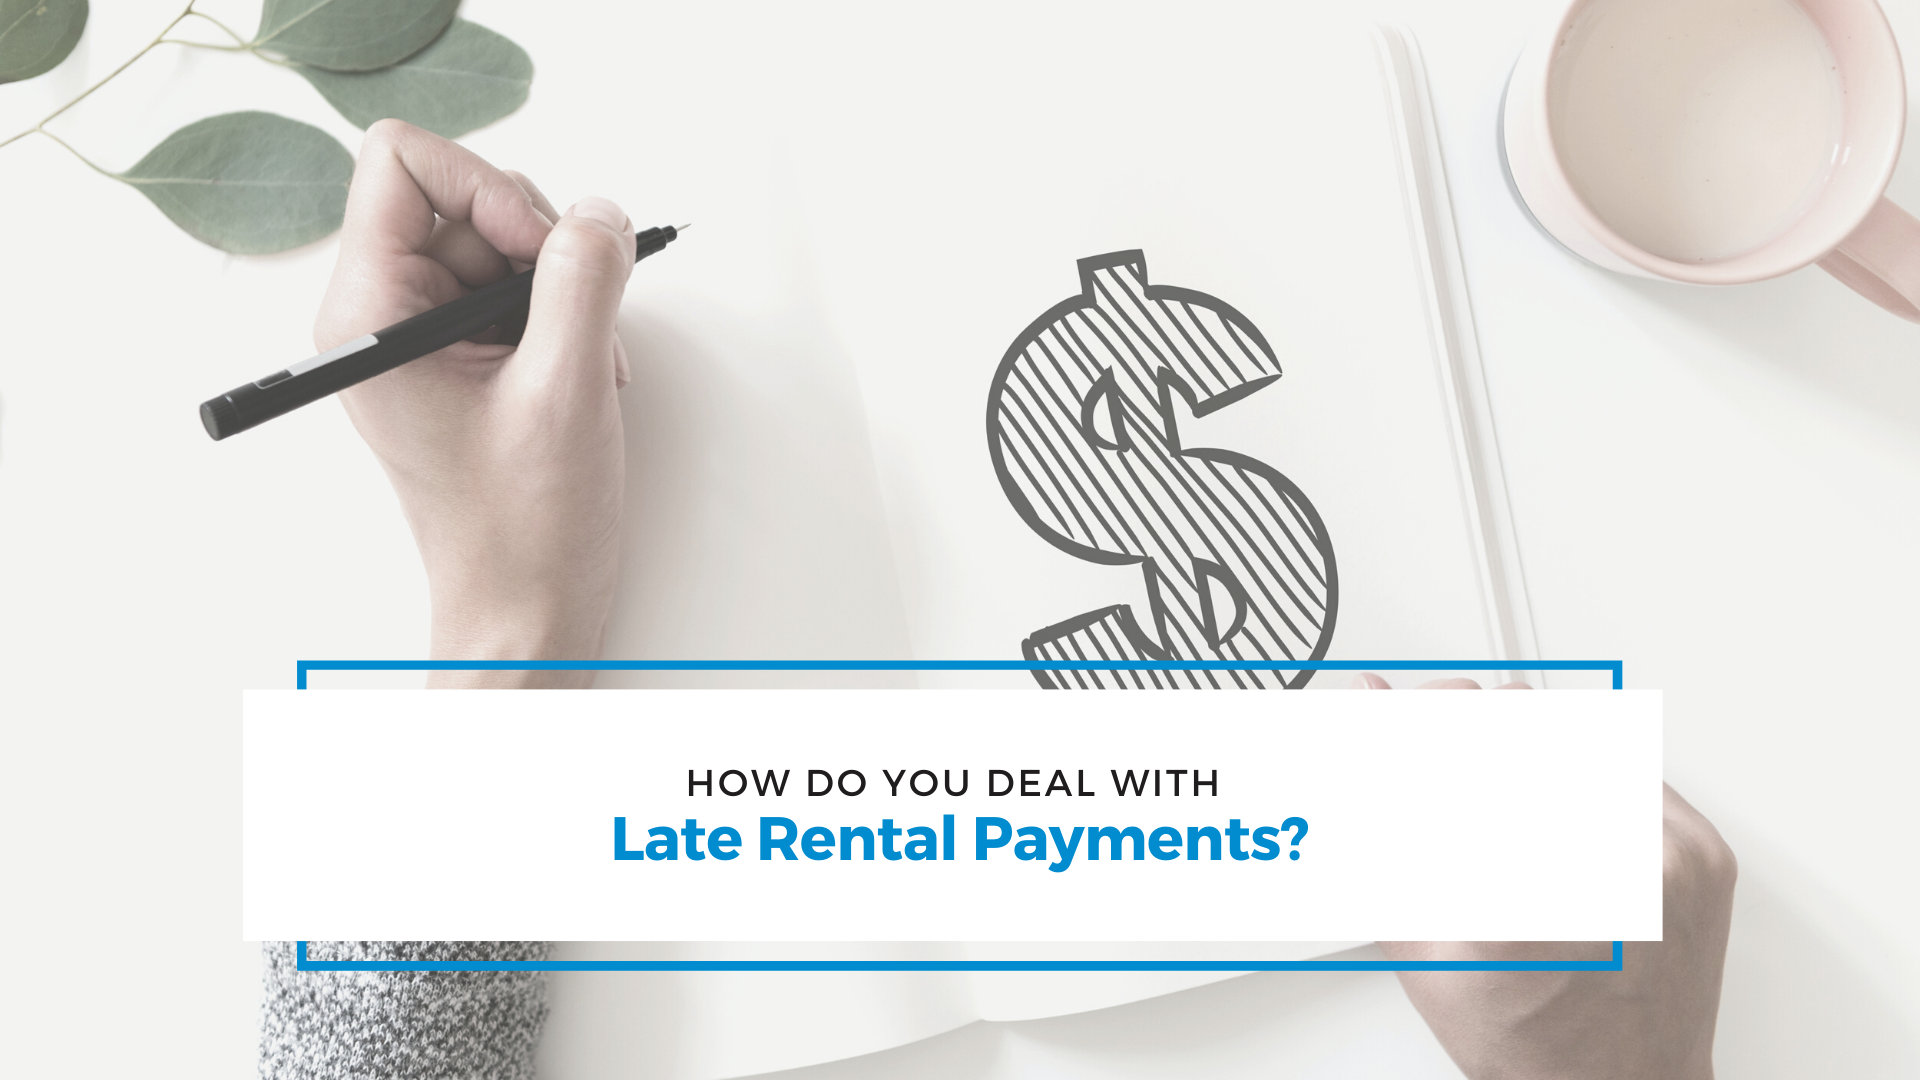 Cary Property Management Advice: How Do You Deal With Late Rental Payments?